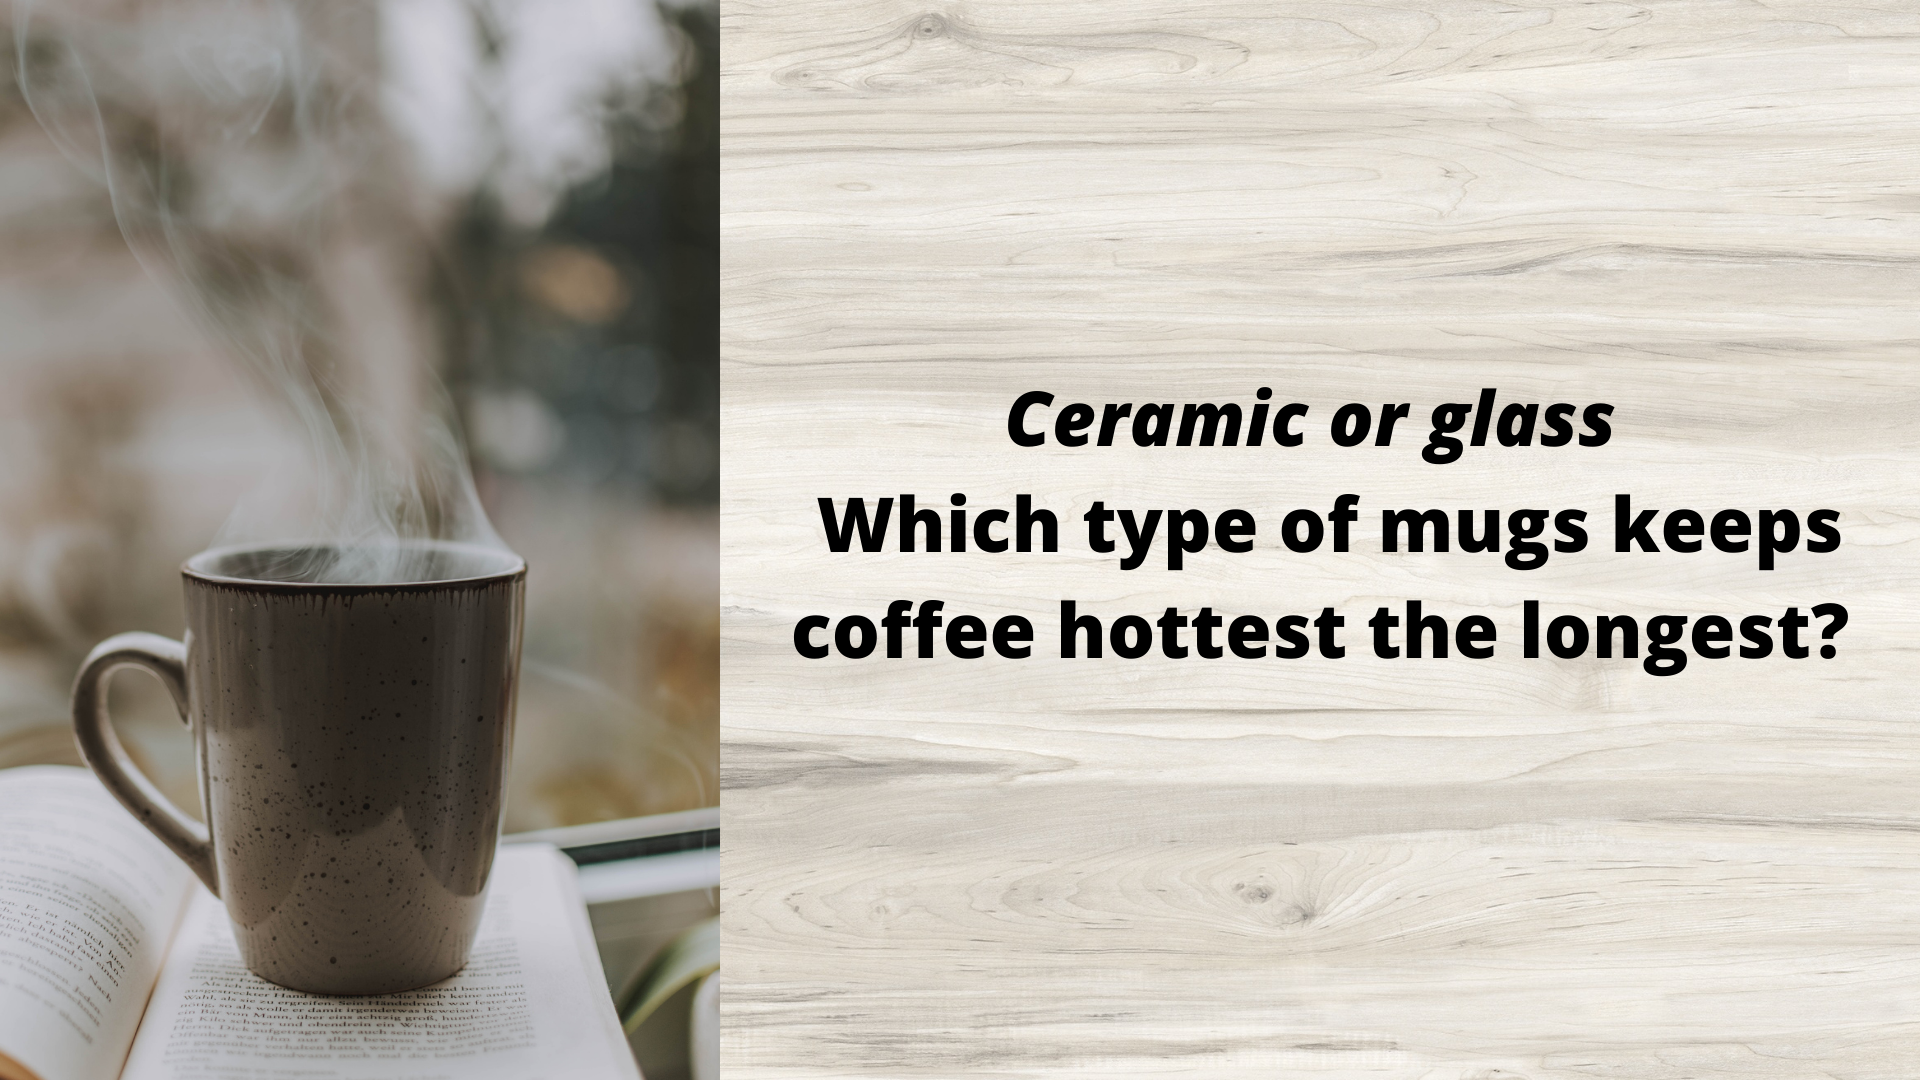 Ceramic or glass - Which type of mugs keeps coffee hottest the longest?